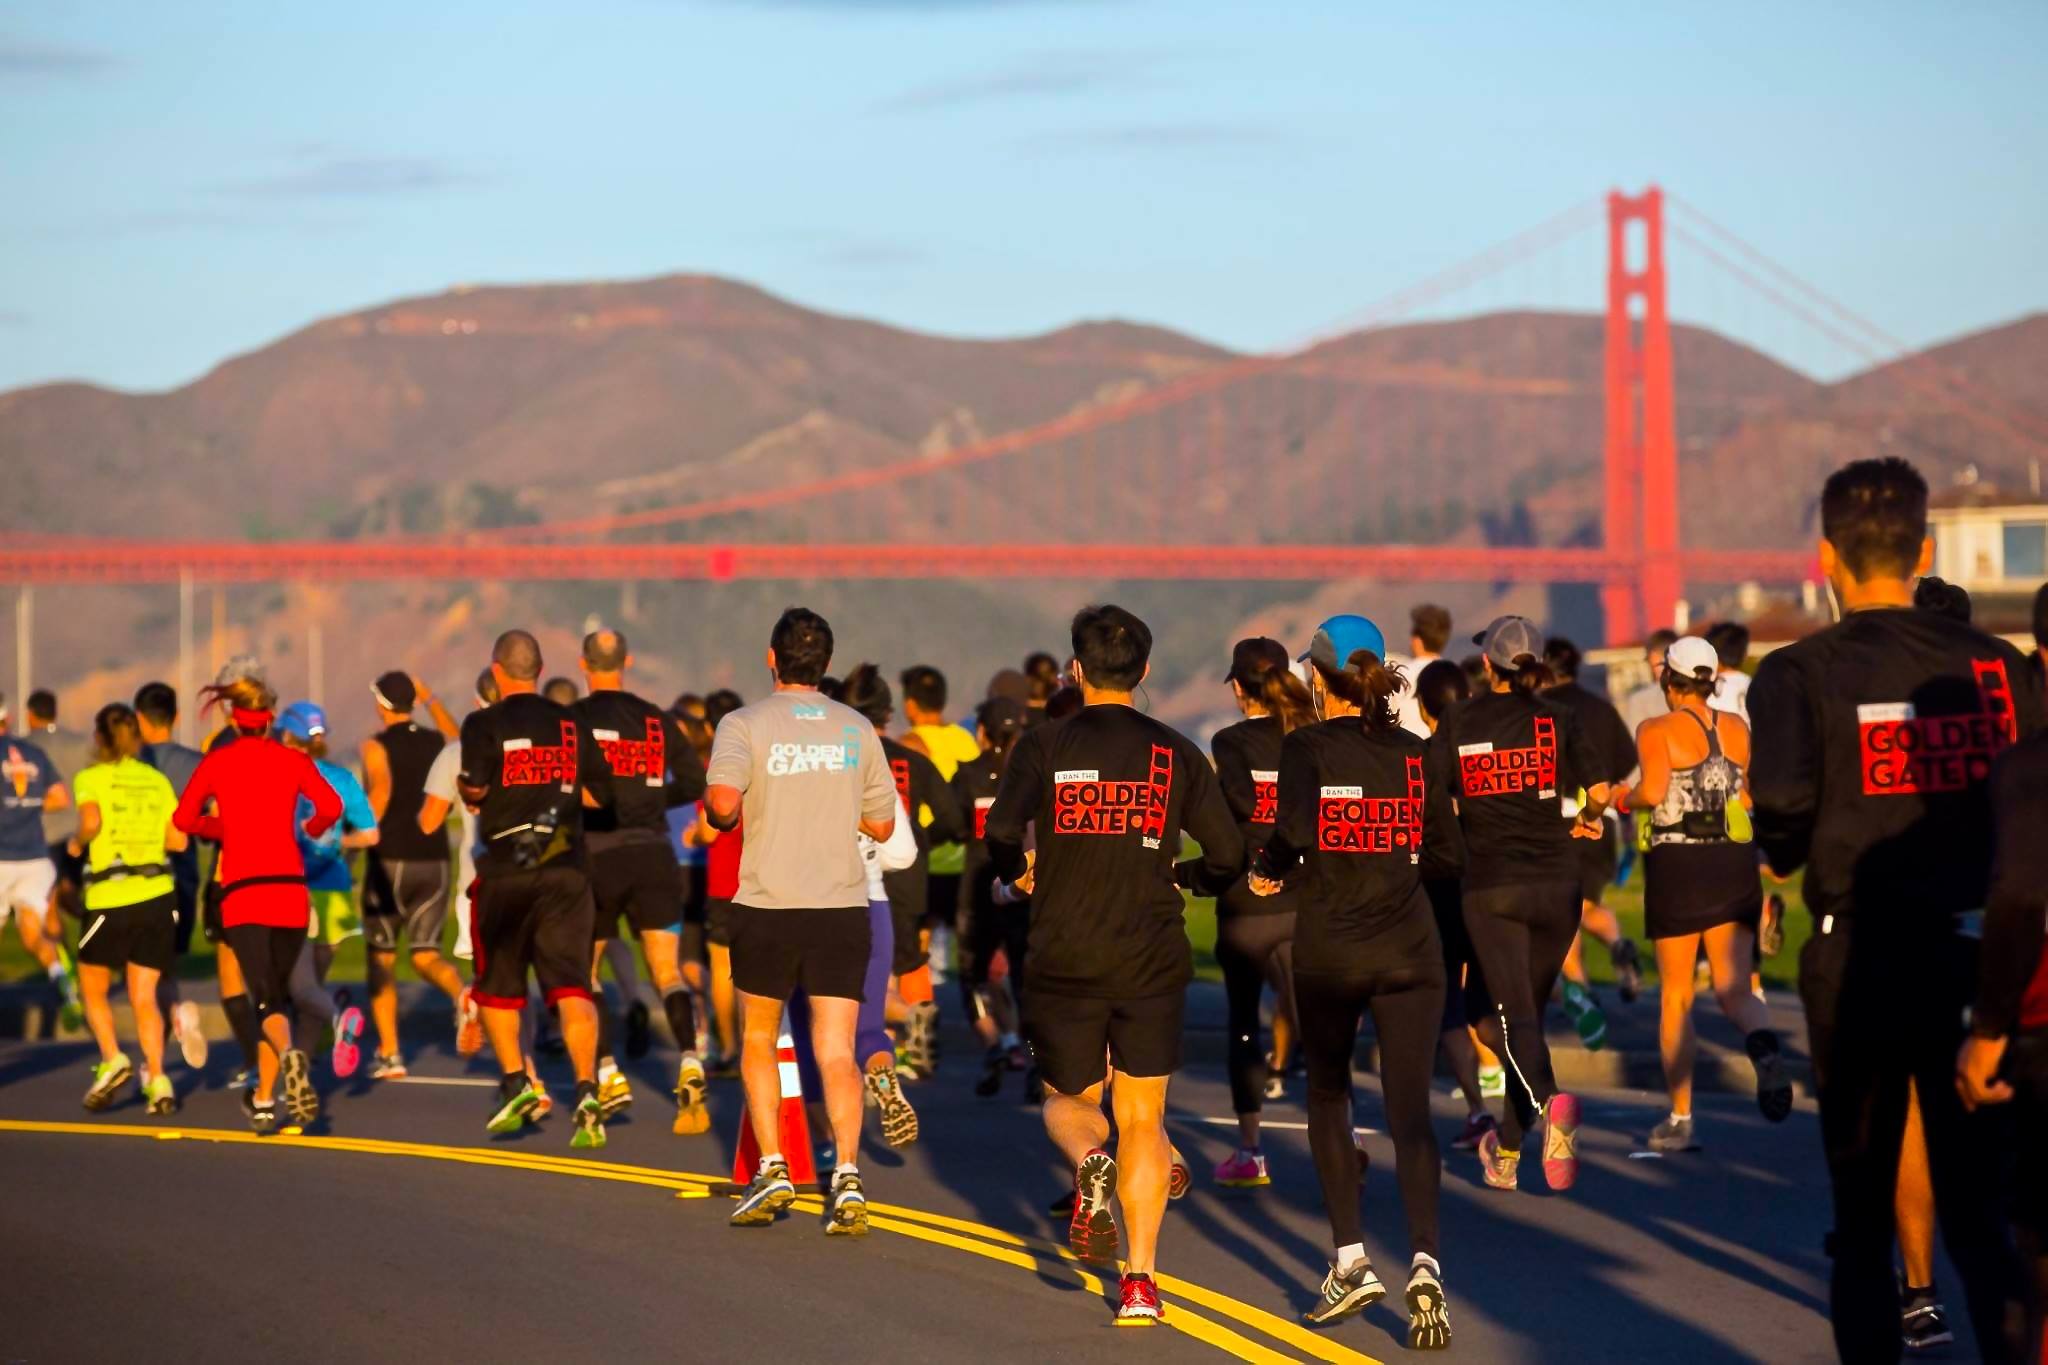 How Early To Get Parking For Golden Gate Half Marathon